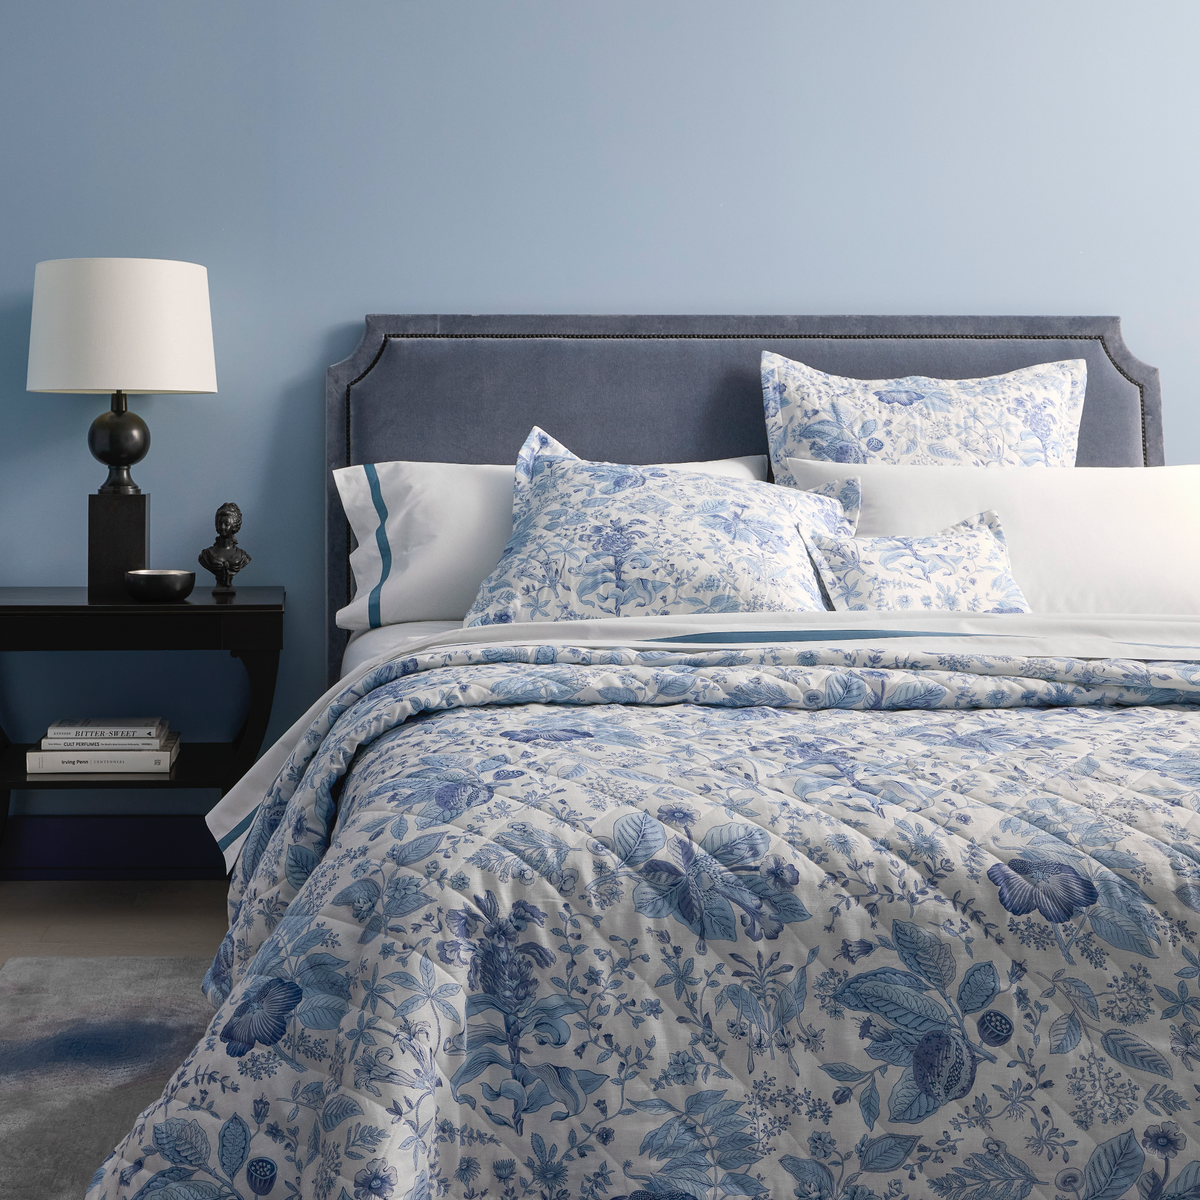 Lifestyle Picture of Corner Full Bed of Matouk Schumacher Pomegranate Linen Bedding in Porcelain Blue Color